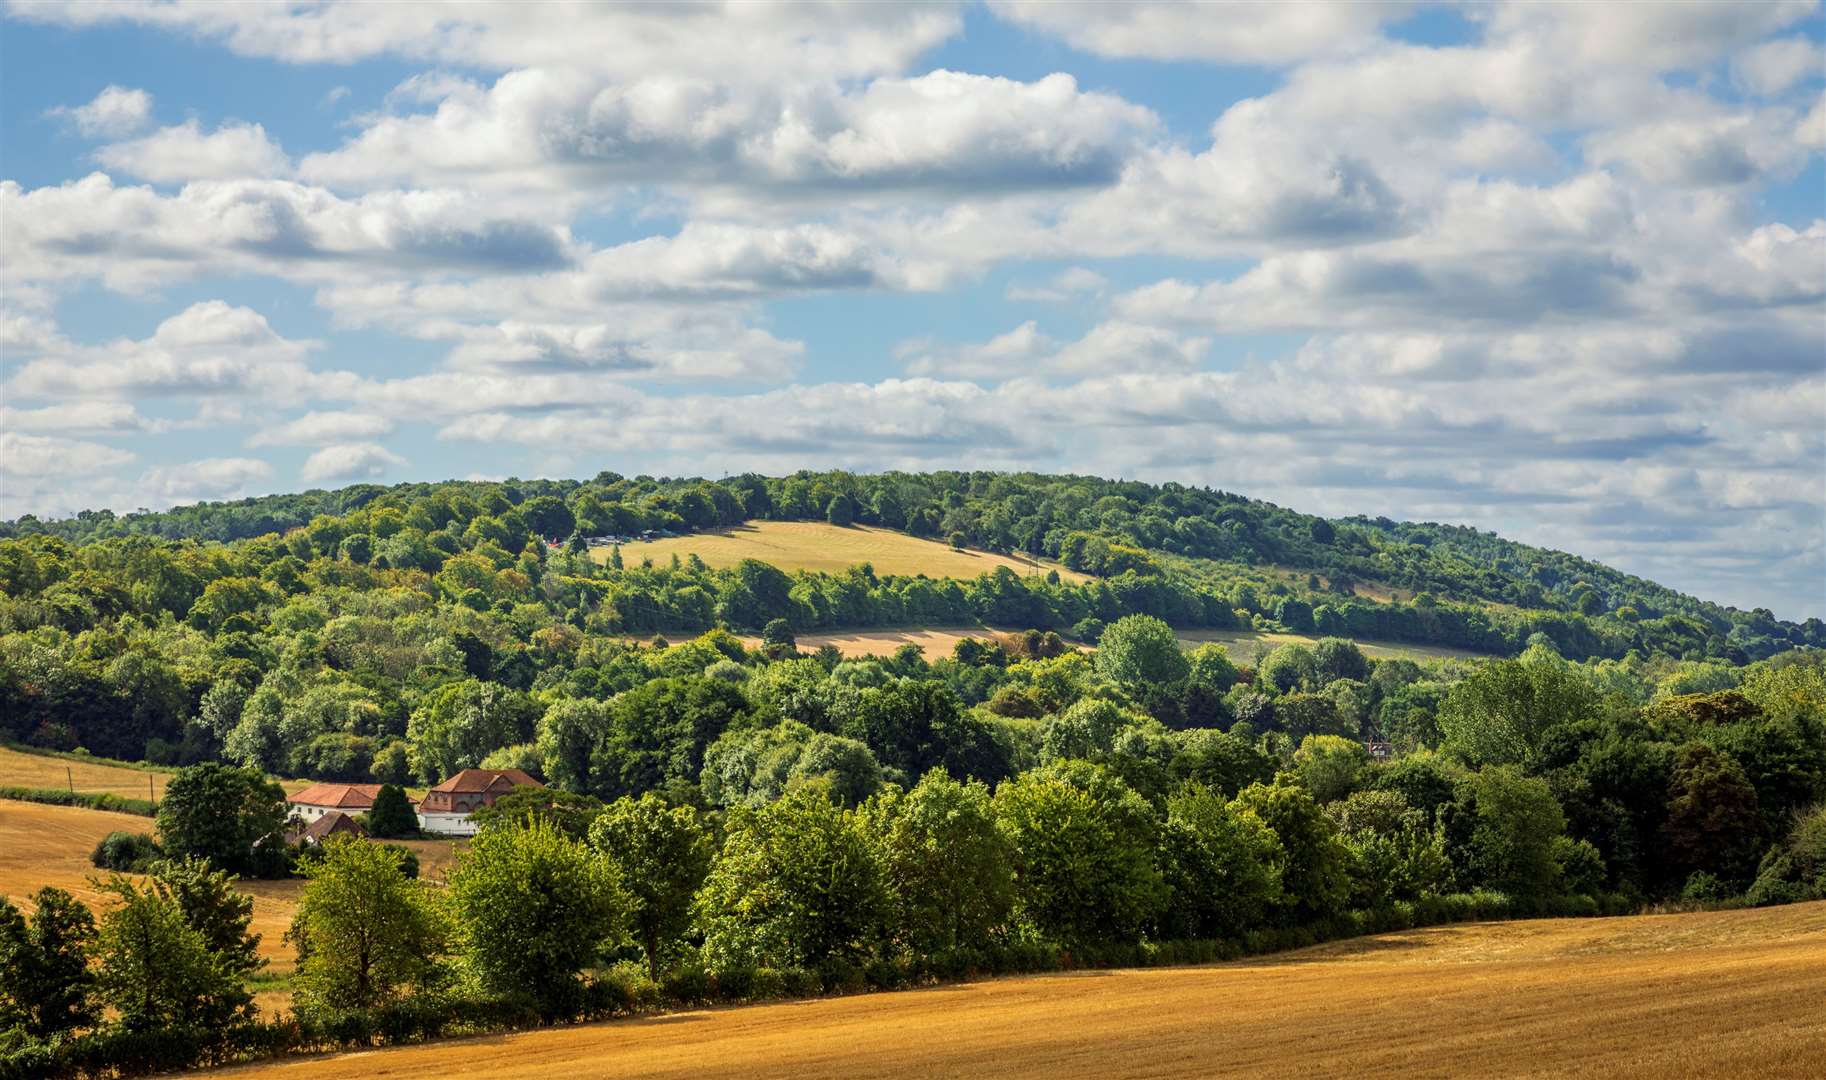 View of Rounds Hill on the Kent Downs from Lullingstone Country Park in Eynsford